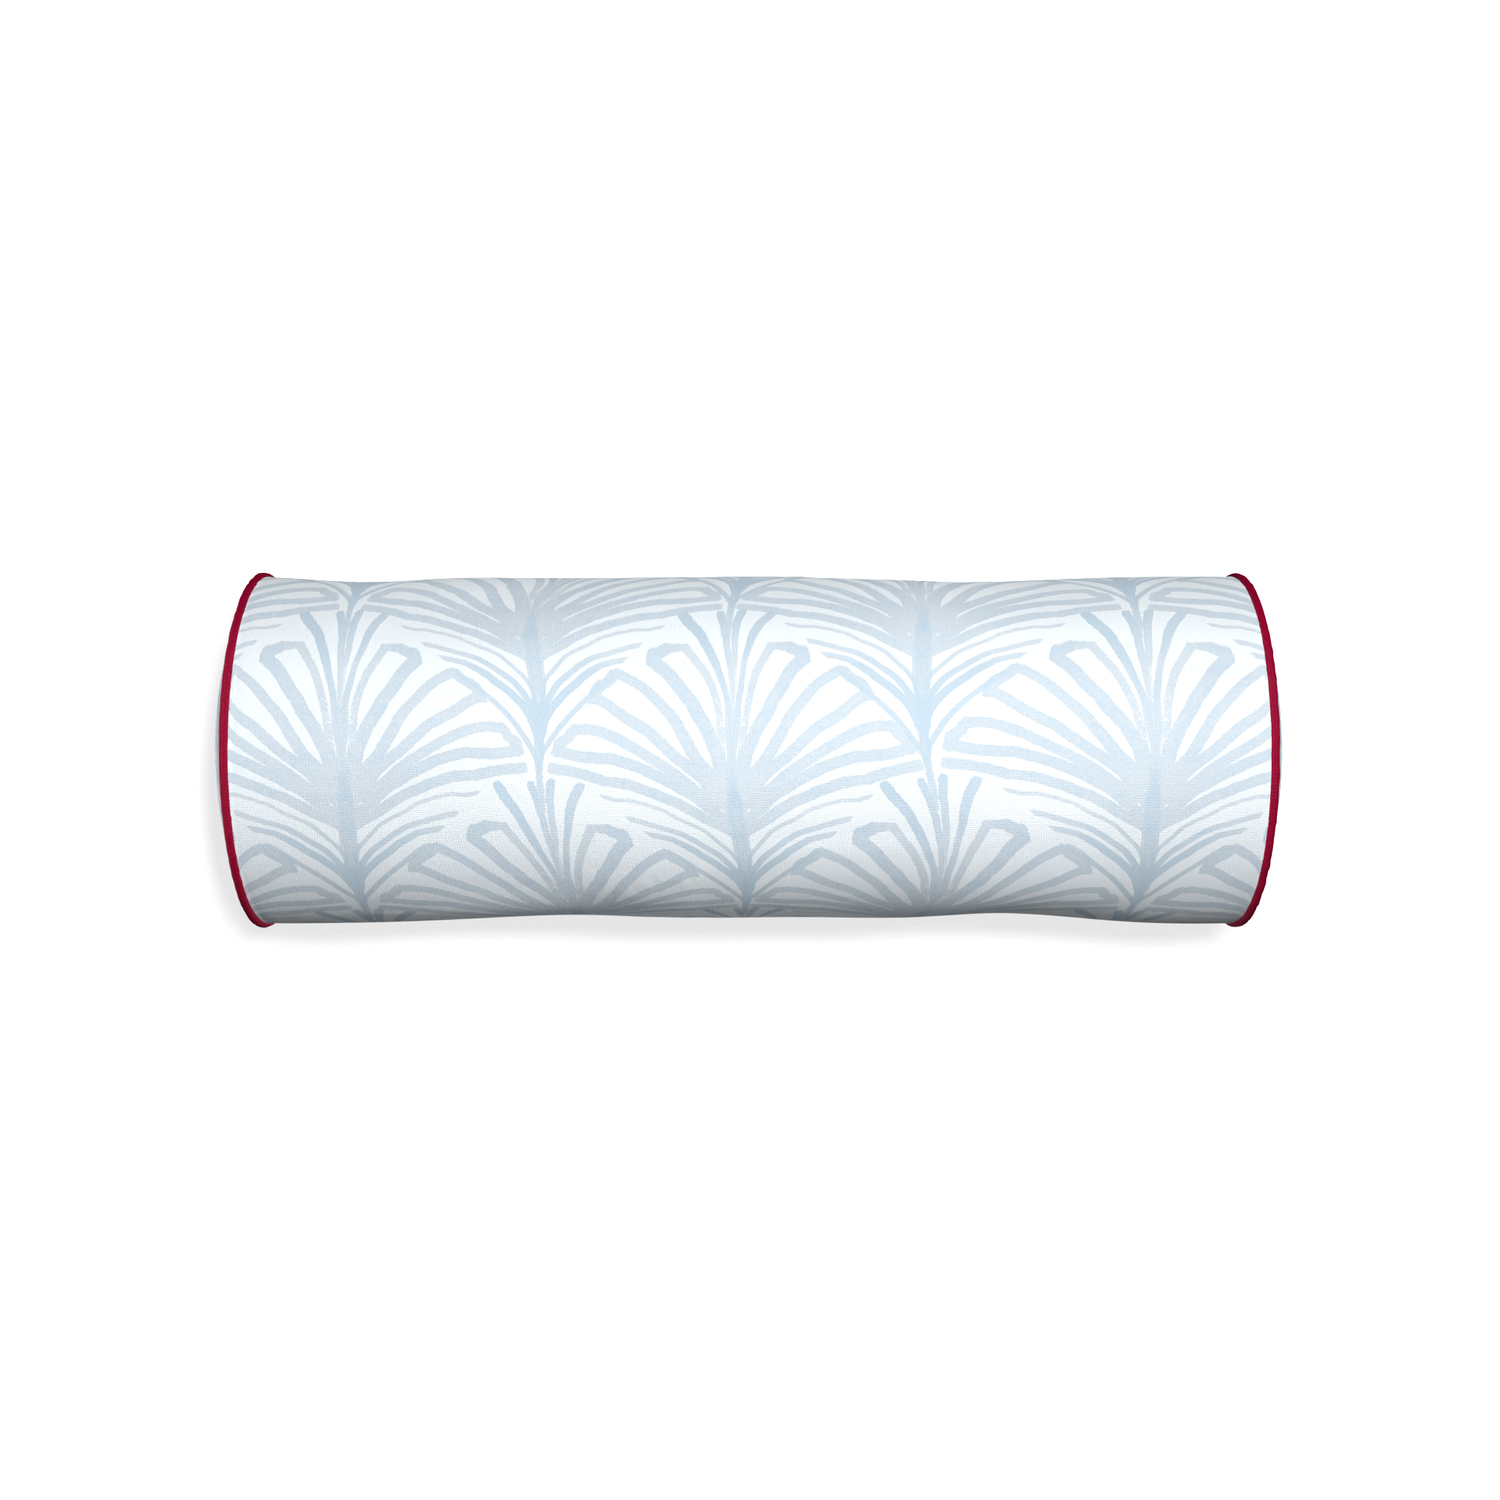 Bolster suzy sky custom sky blue palmpillow with raspberry piping on white background